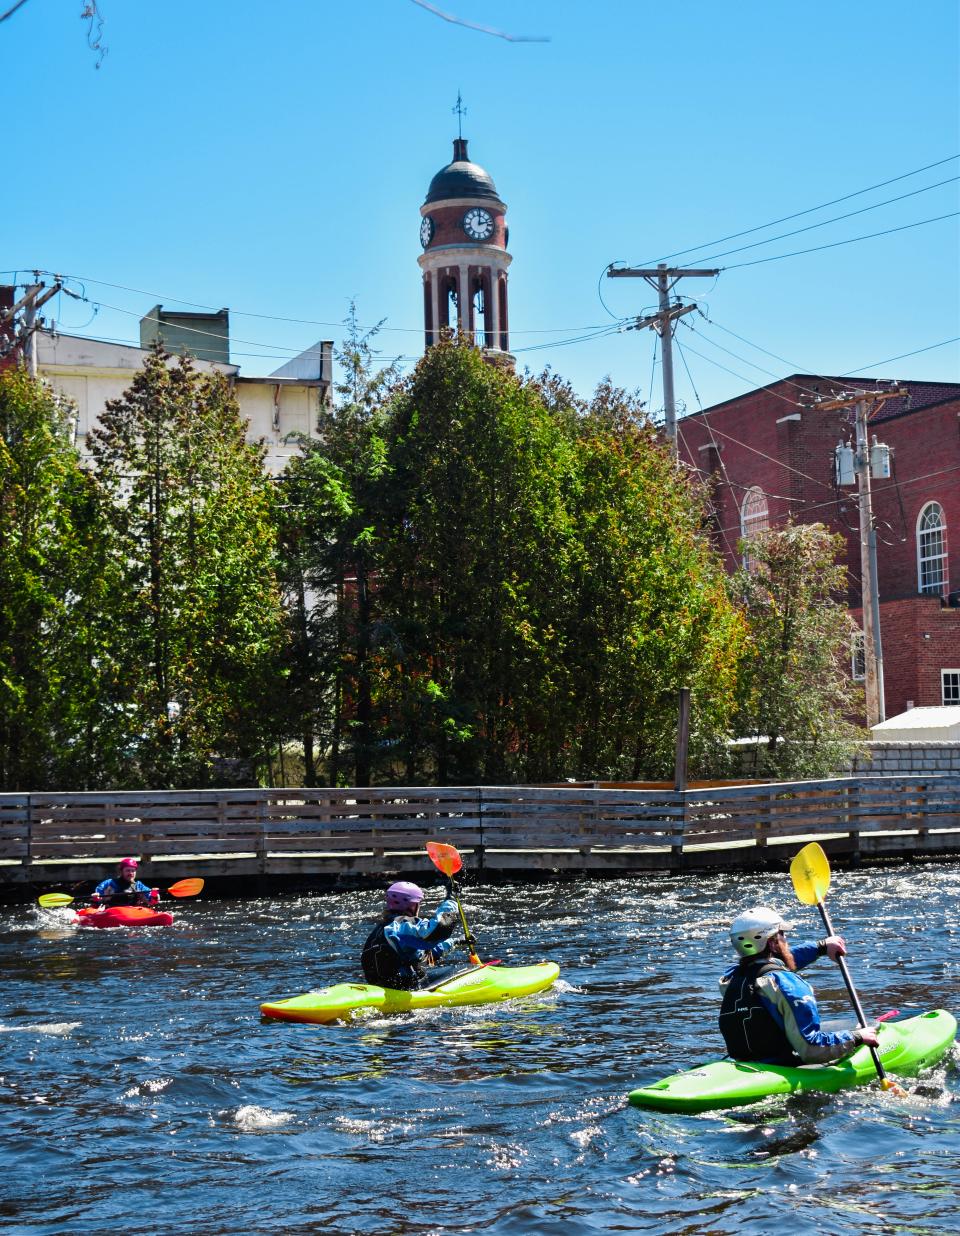 A group paddles their kayaks on a river with the town in the background.